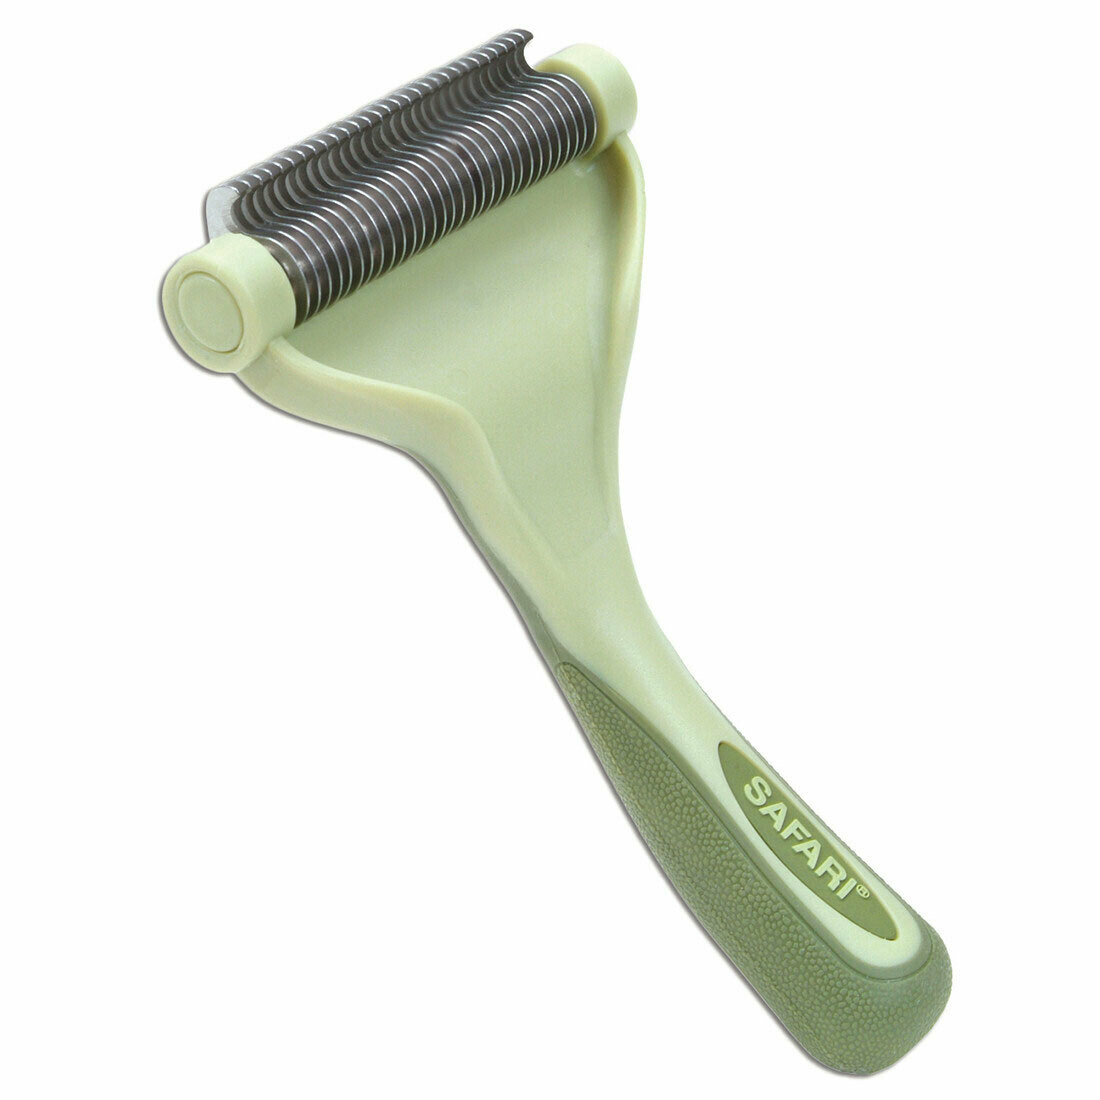 Shed Magic De-Shedding Tool For Medium Dogs With Medium To Long Hair